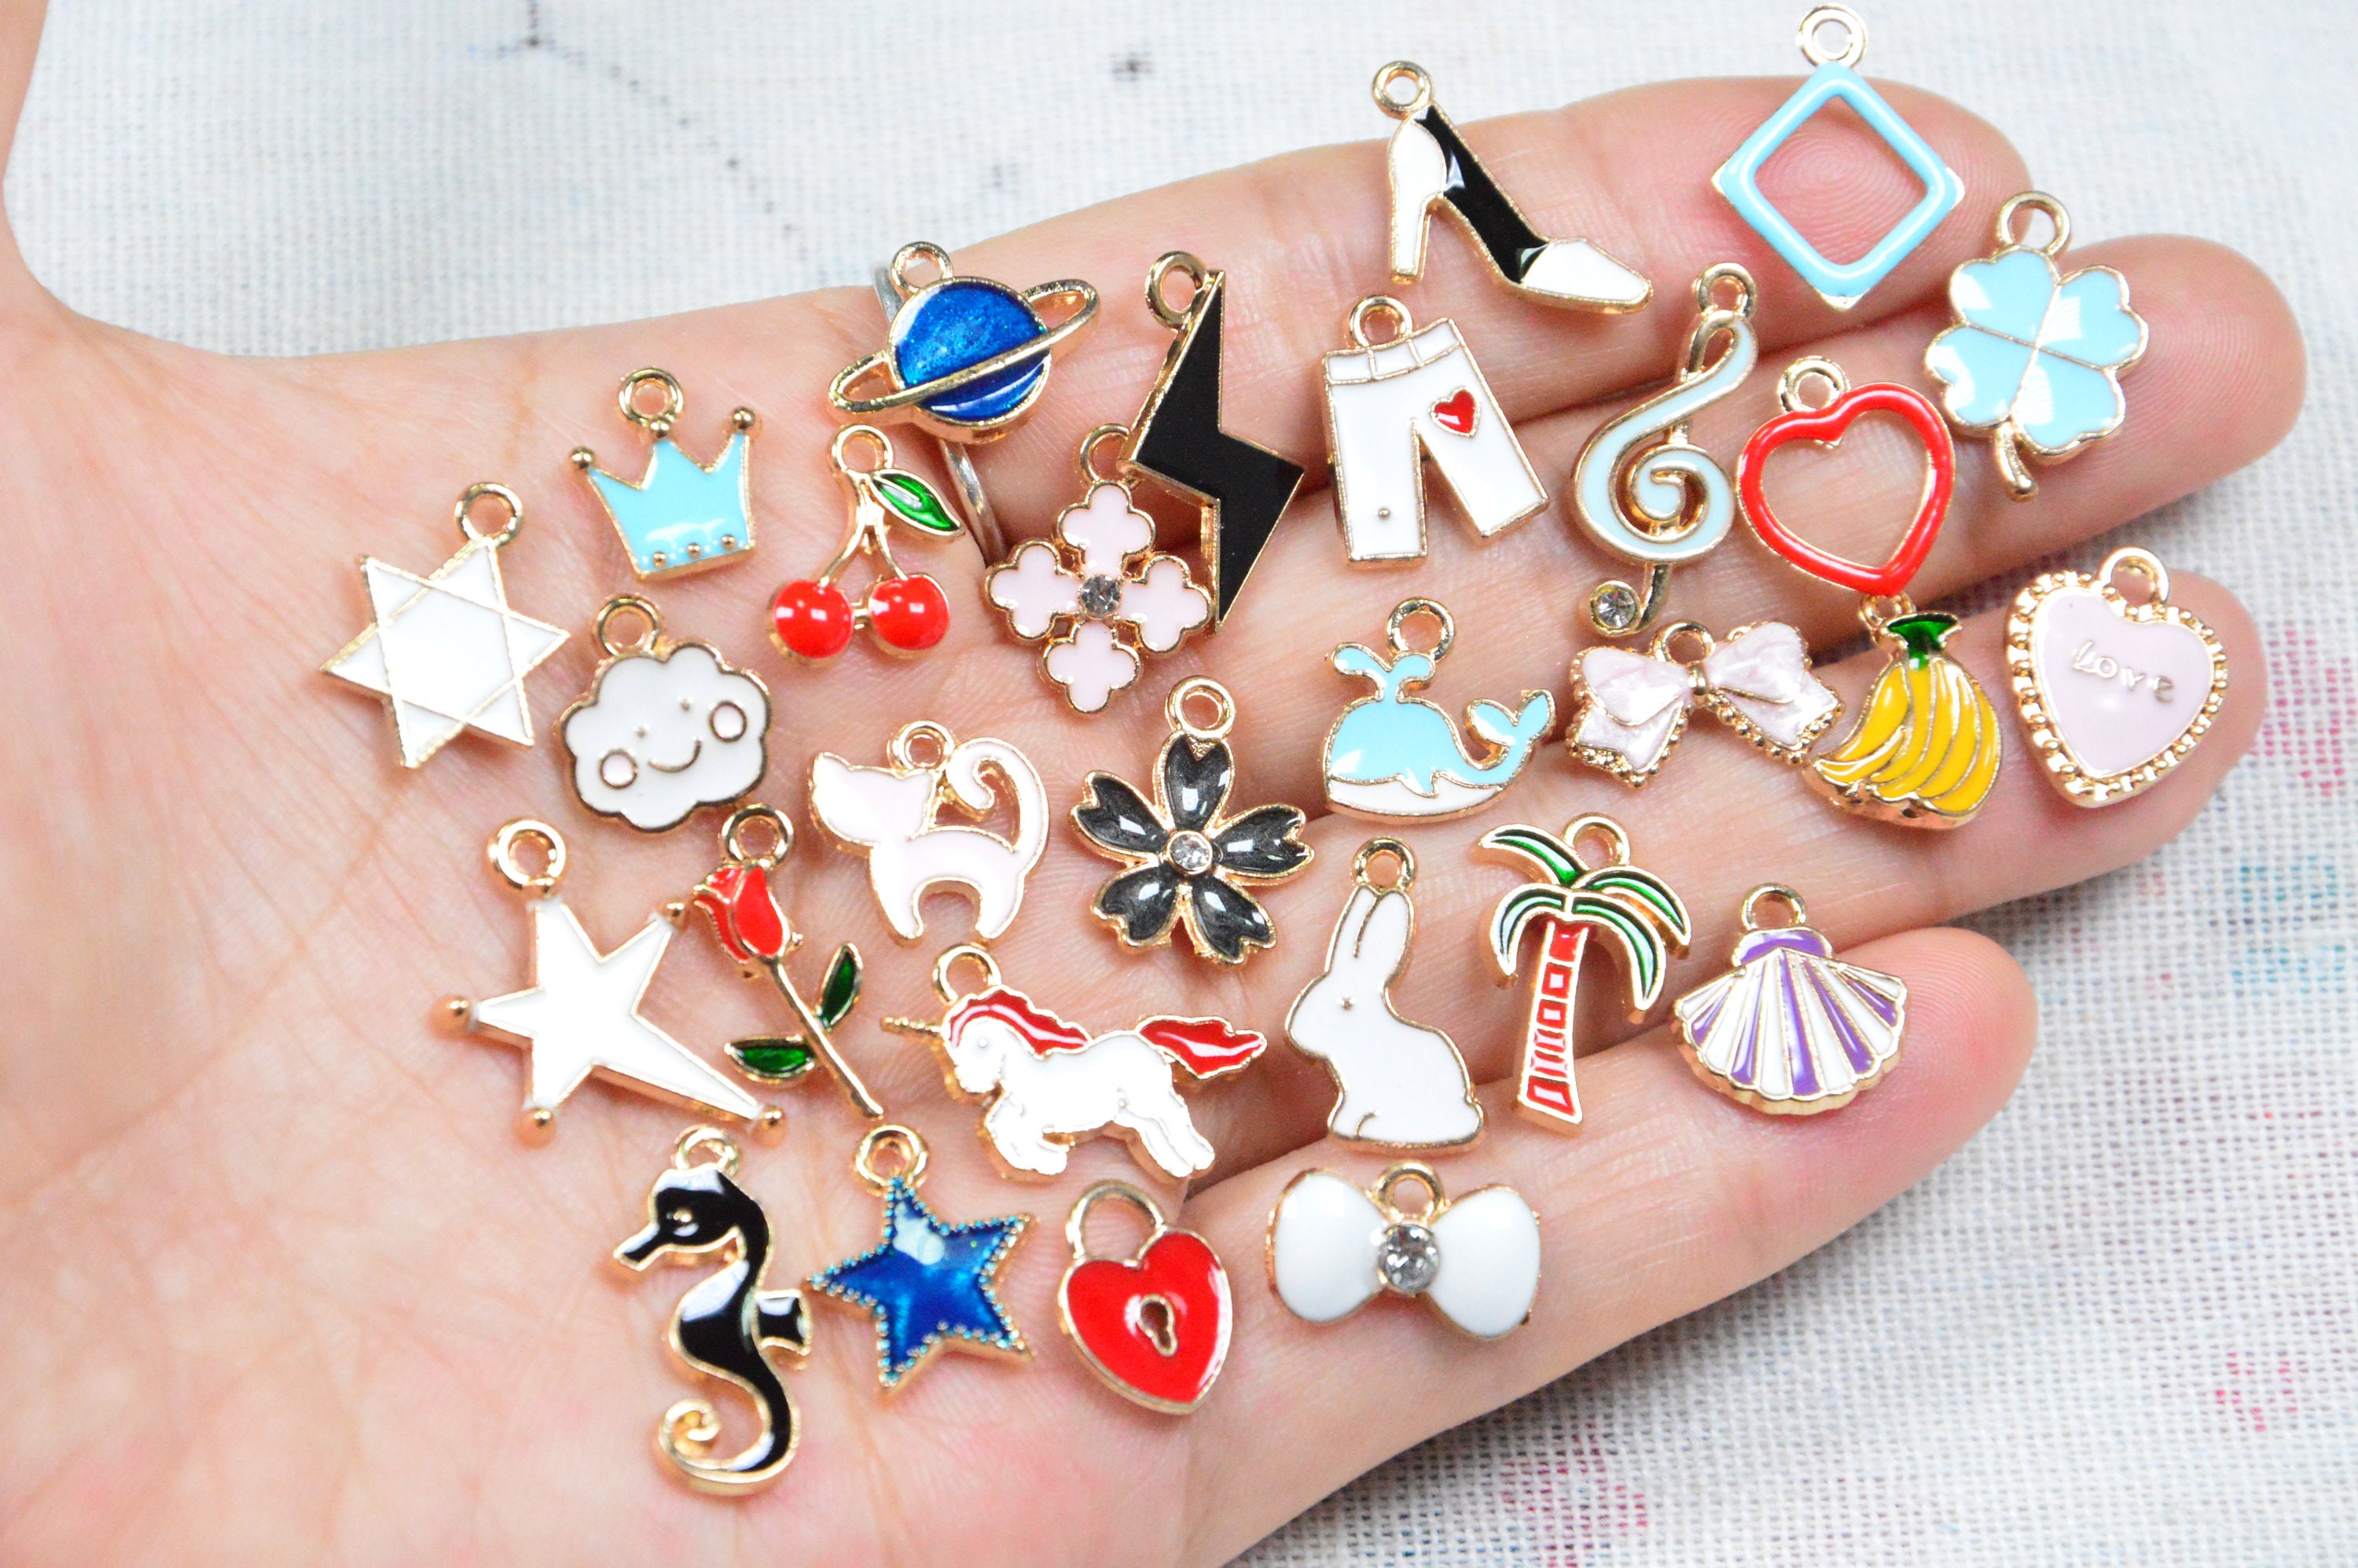 Fashewelry 70pcs Alloy Enamel Number Charms 7 Colors Flat Round 0-9 Number Pendants for DIY Jewelry Making